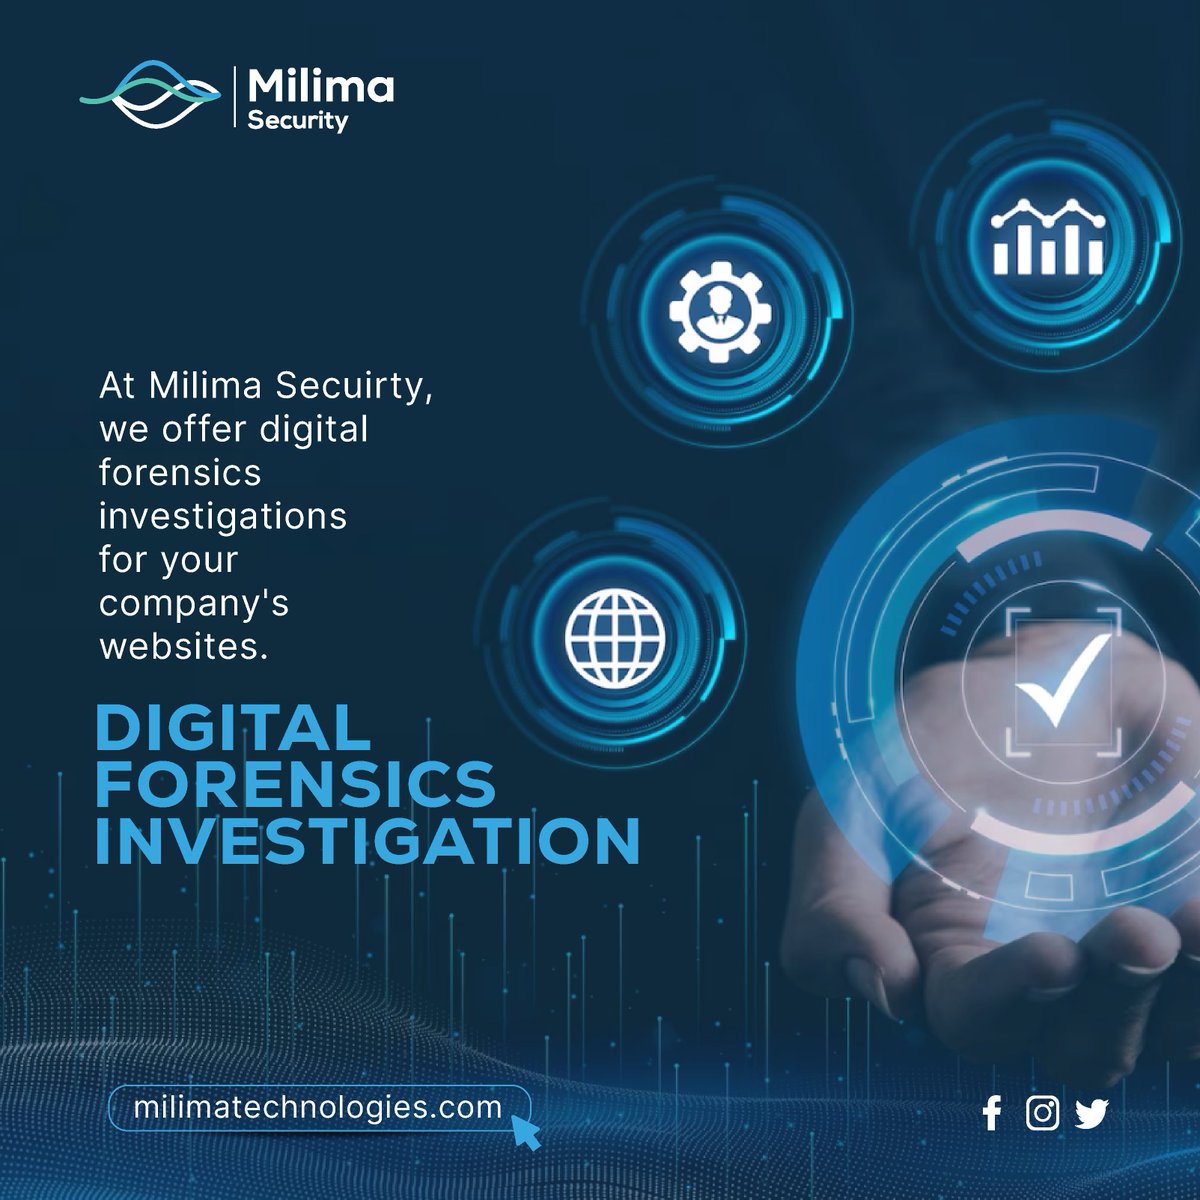 Digital Forensics Investigations is an important practice in cyber security. 
It involves collection, examination, preservation and presentation of digital evidence which is used during a digital investigation. 
#forensics  #cybersecurity @gdprAI @stanbicug @GoldmineFinance